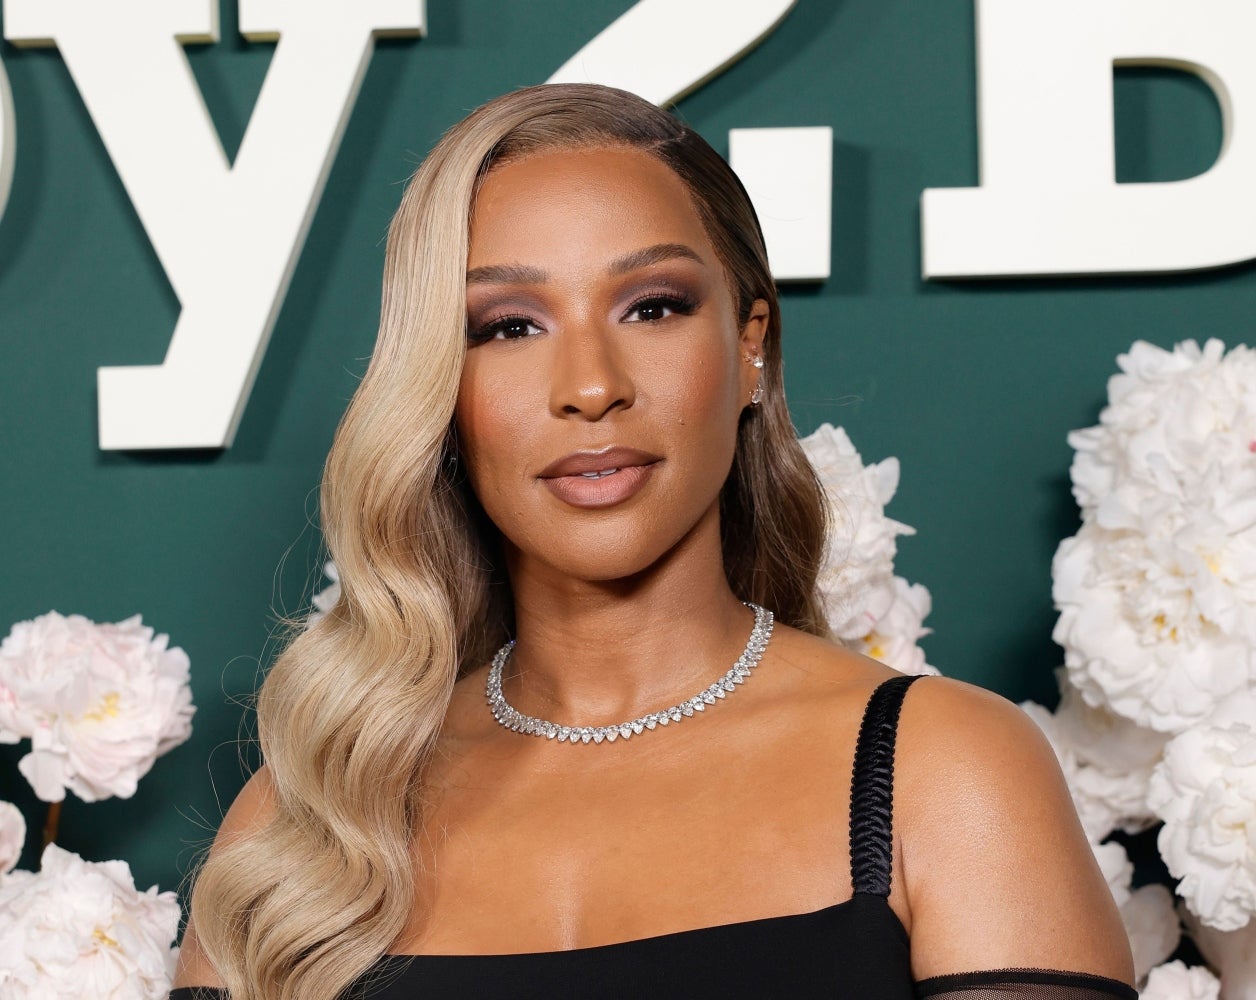 Savannah James’ Stylist Debunks Rumor That She Won’t Take Pictures With Male Fans